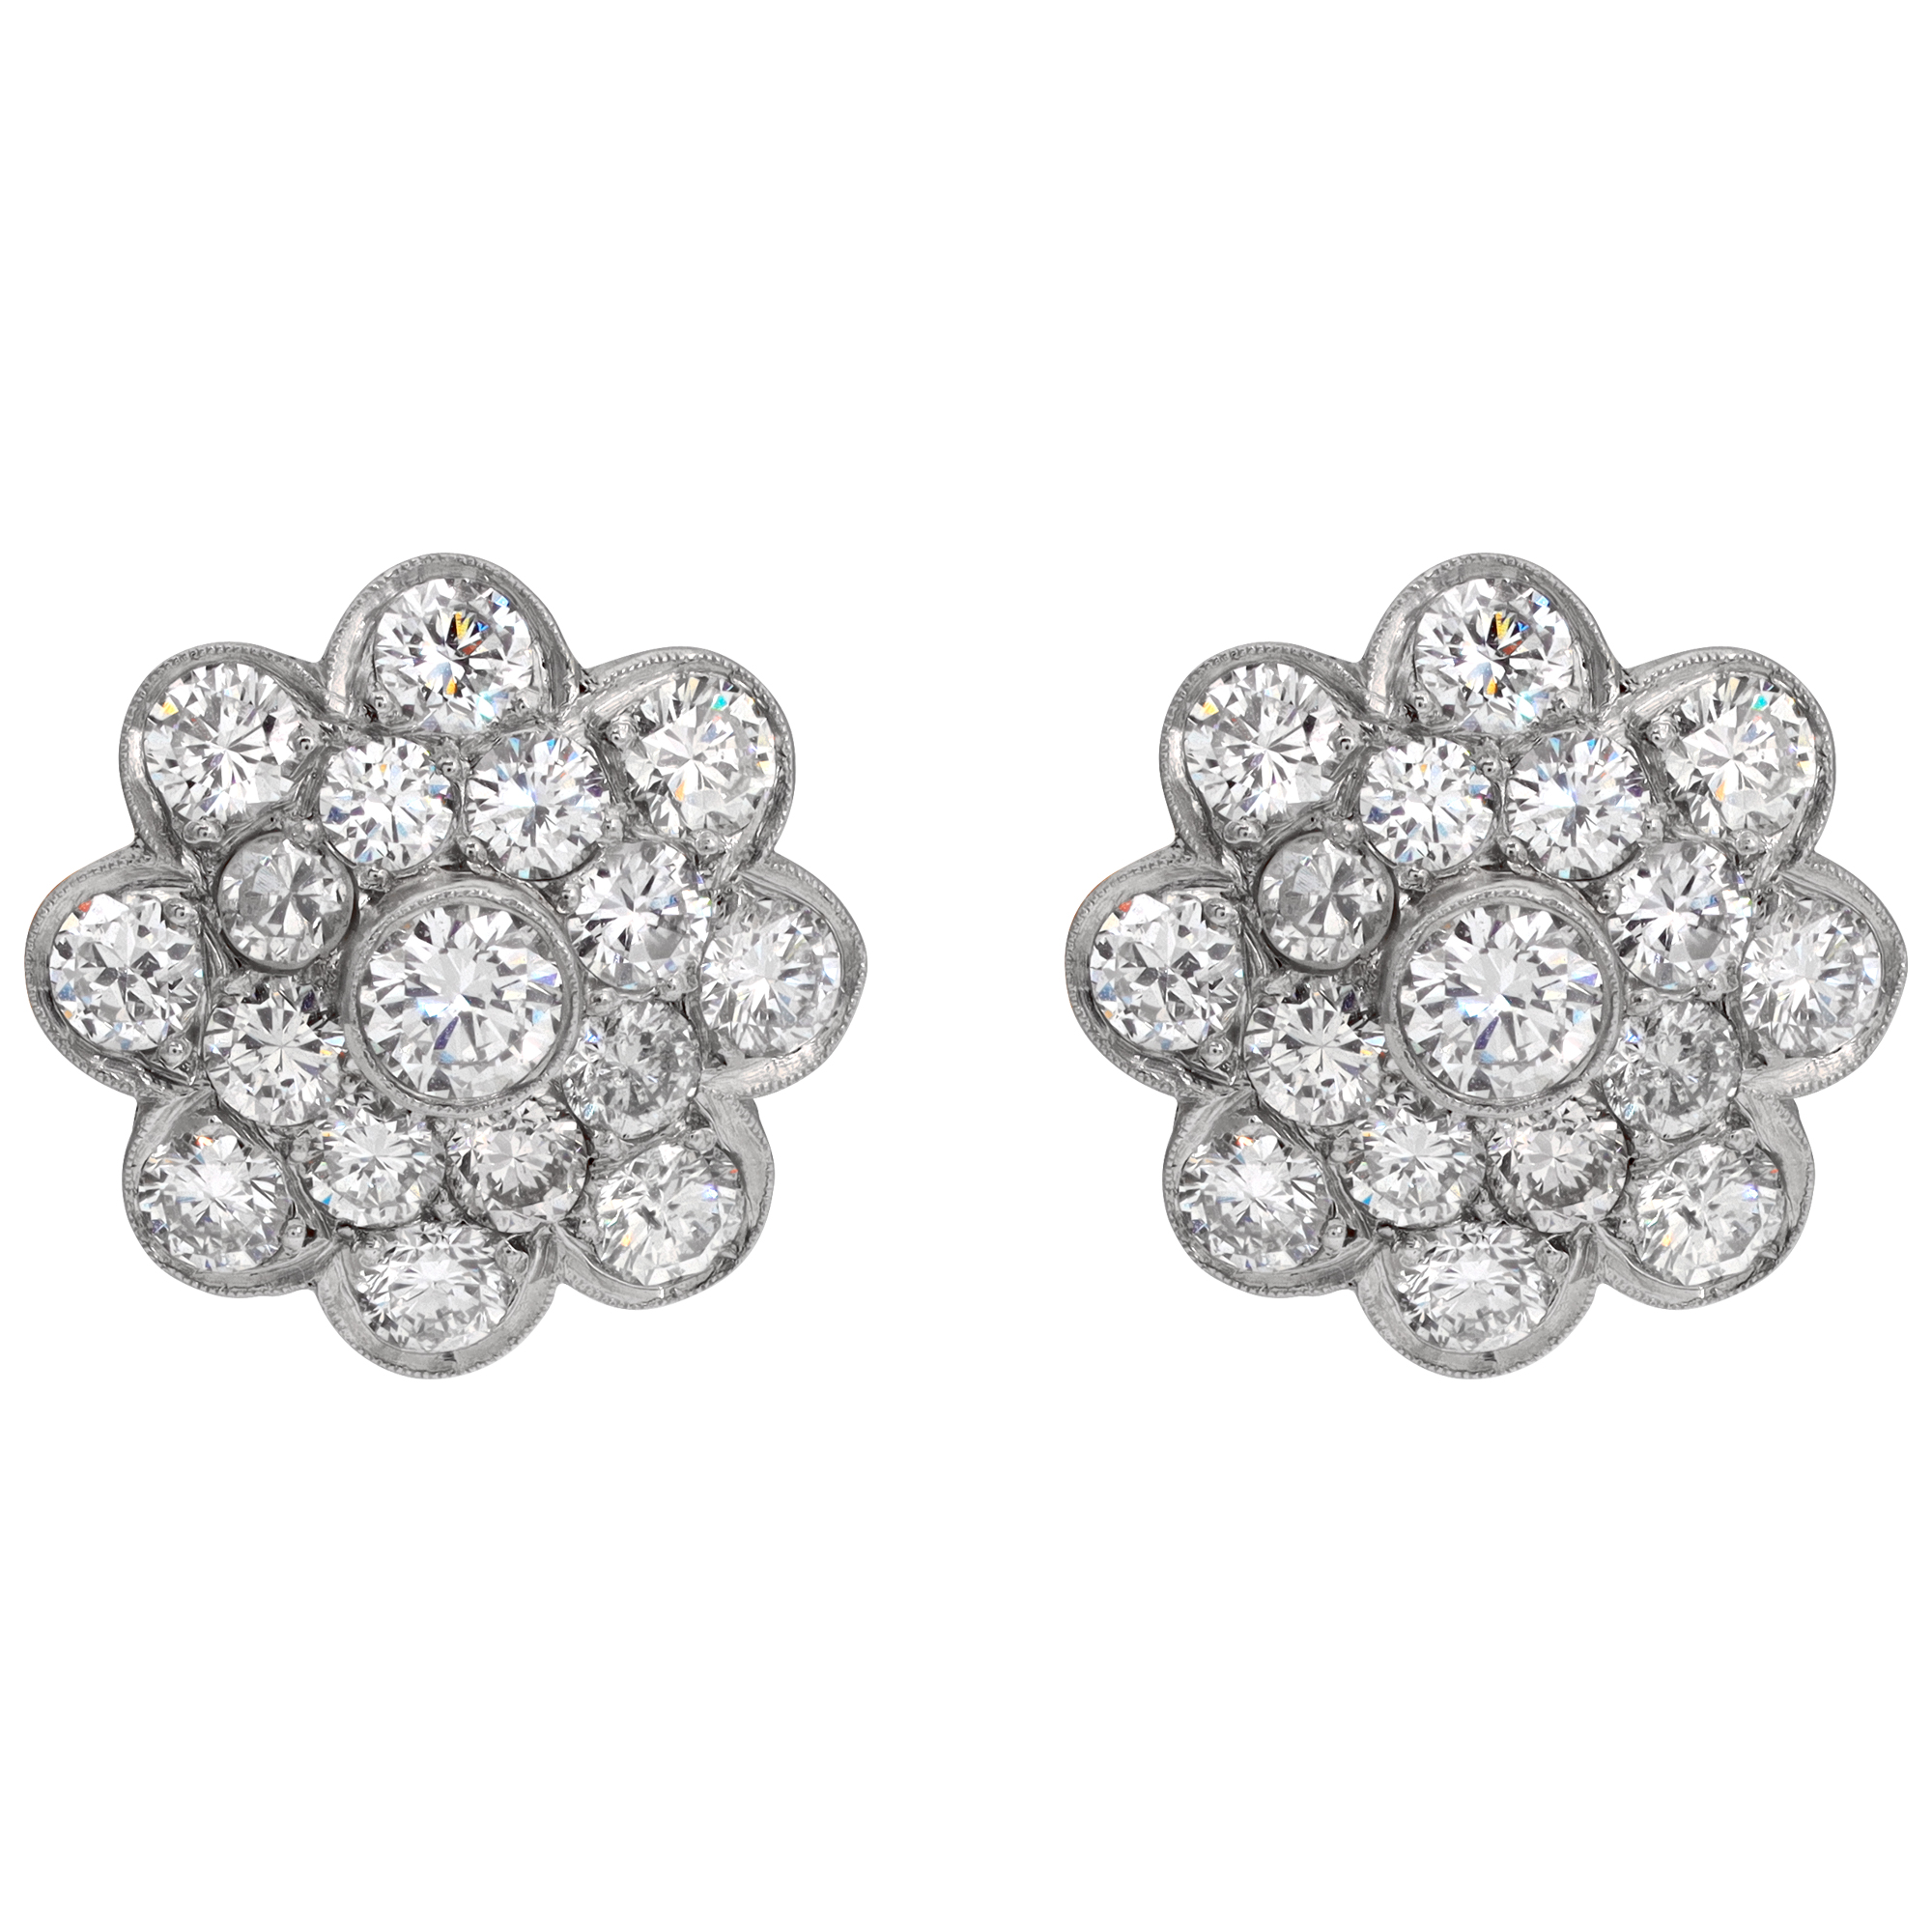 Diamond cluster flower earrings in platinum, approx. 4 carats in diamonds